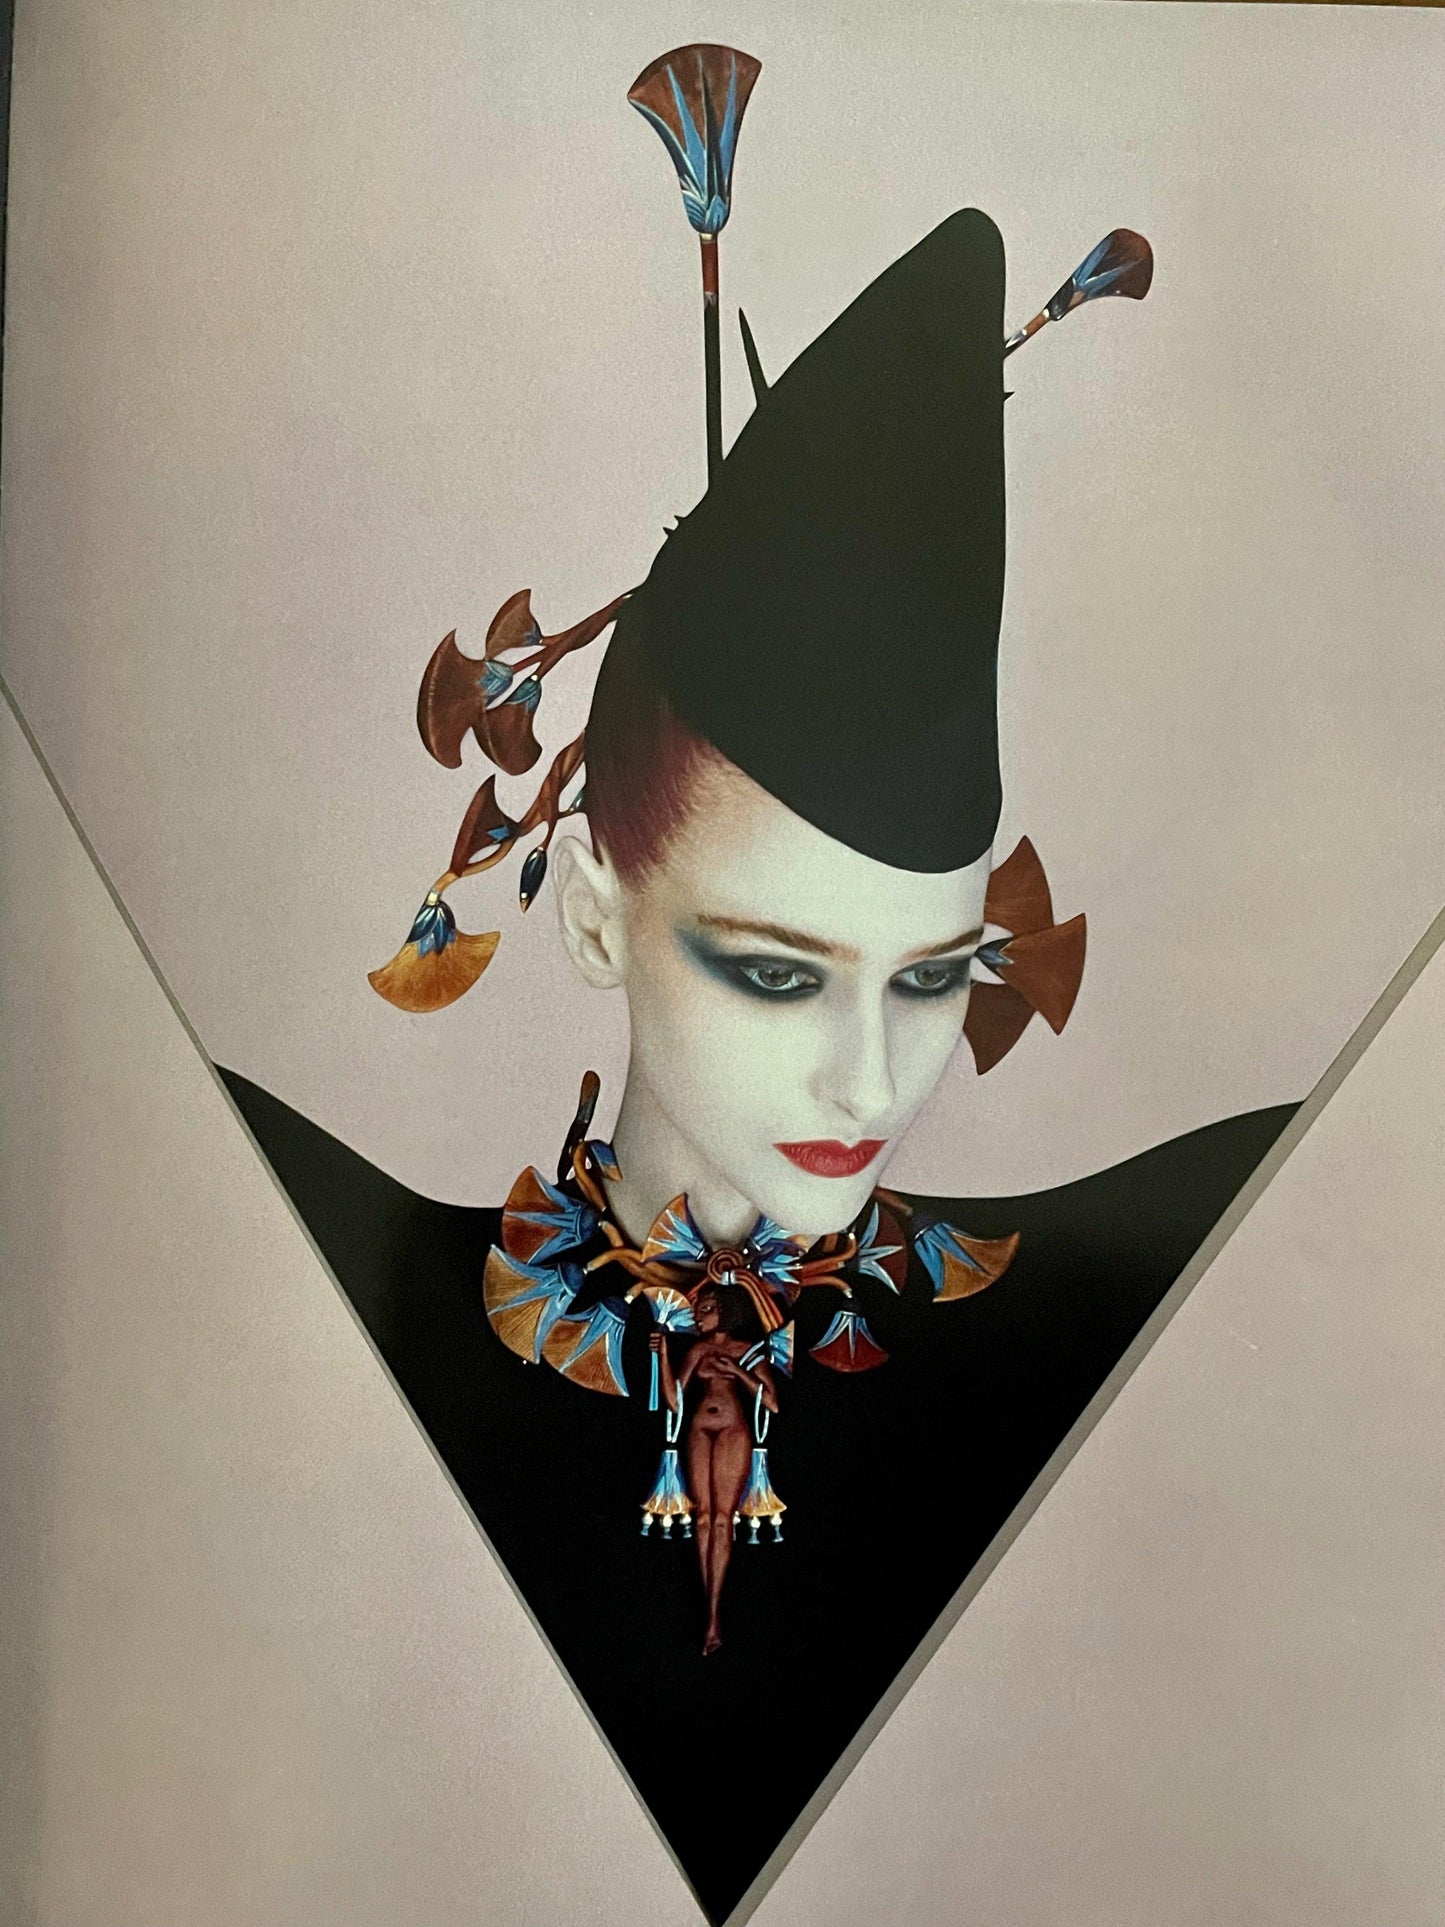 L'esprit Serge Lutens / The Spirit of Beauty / First Edition / 1992 - Precious Cache